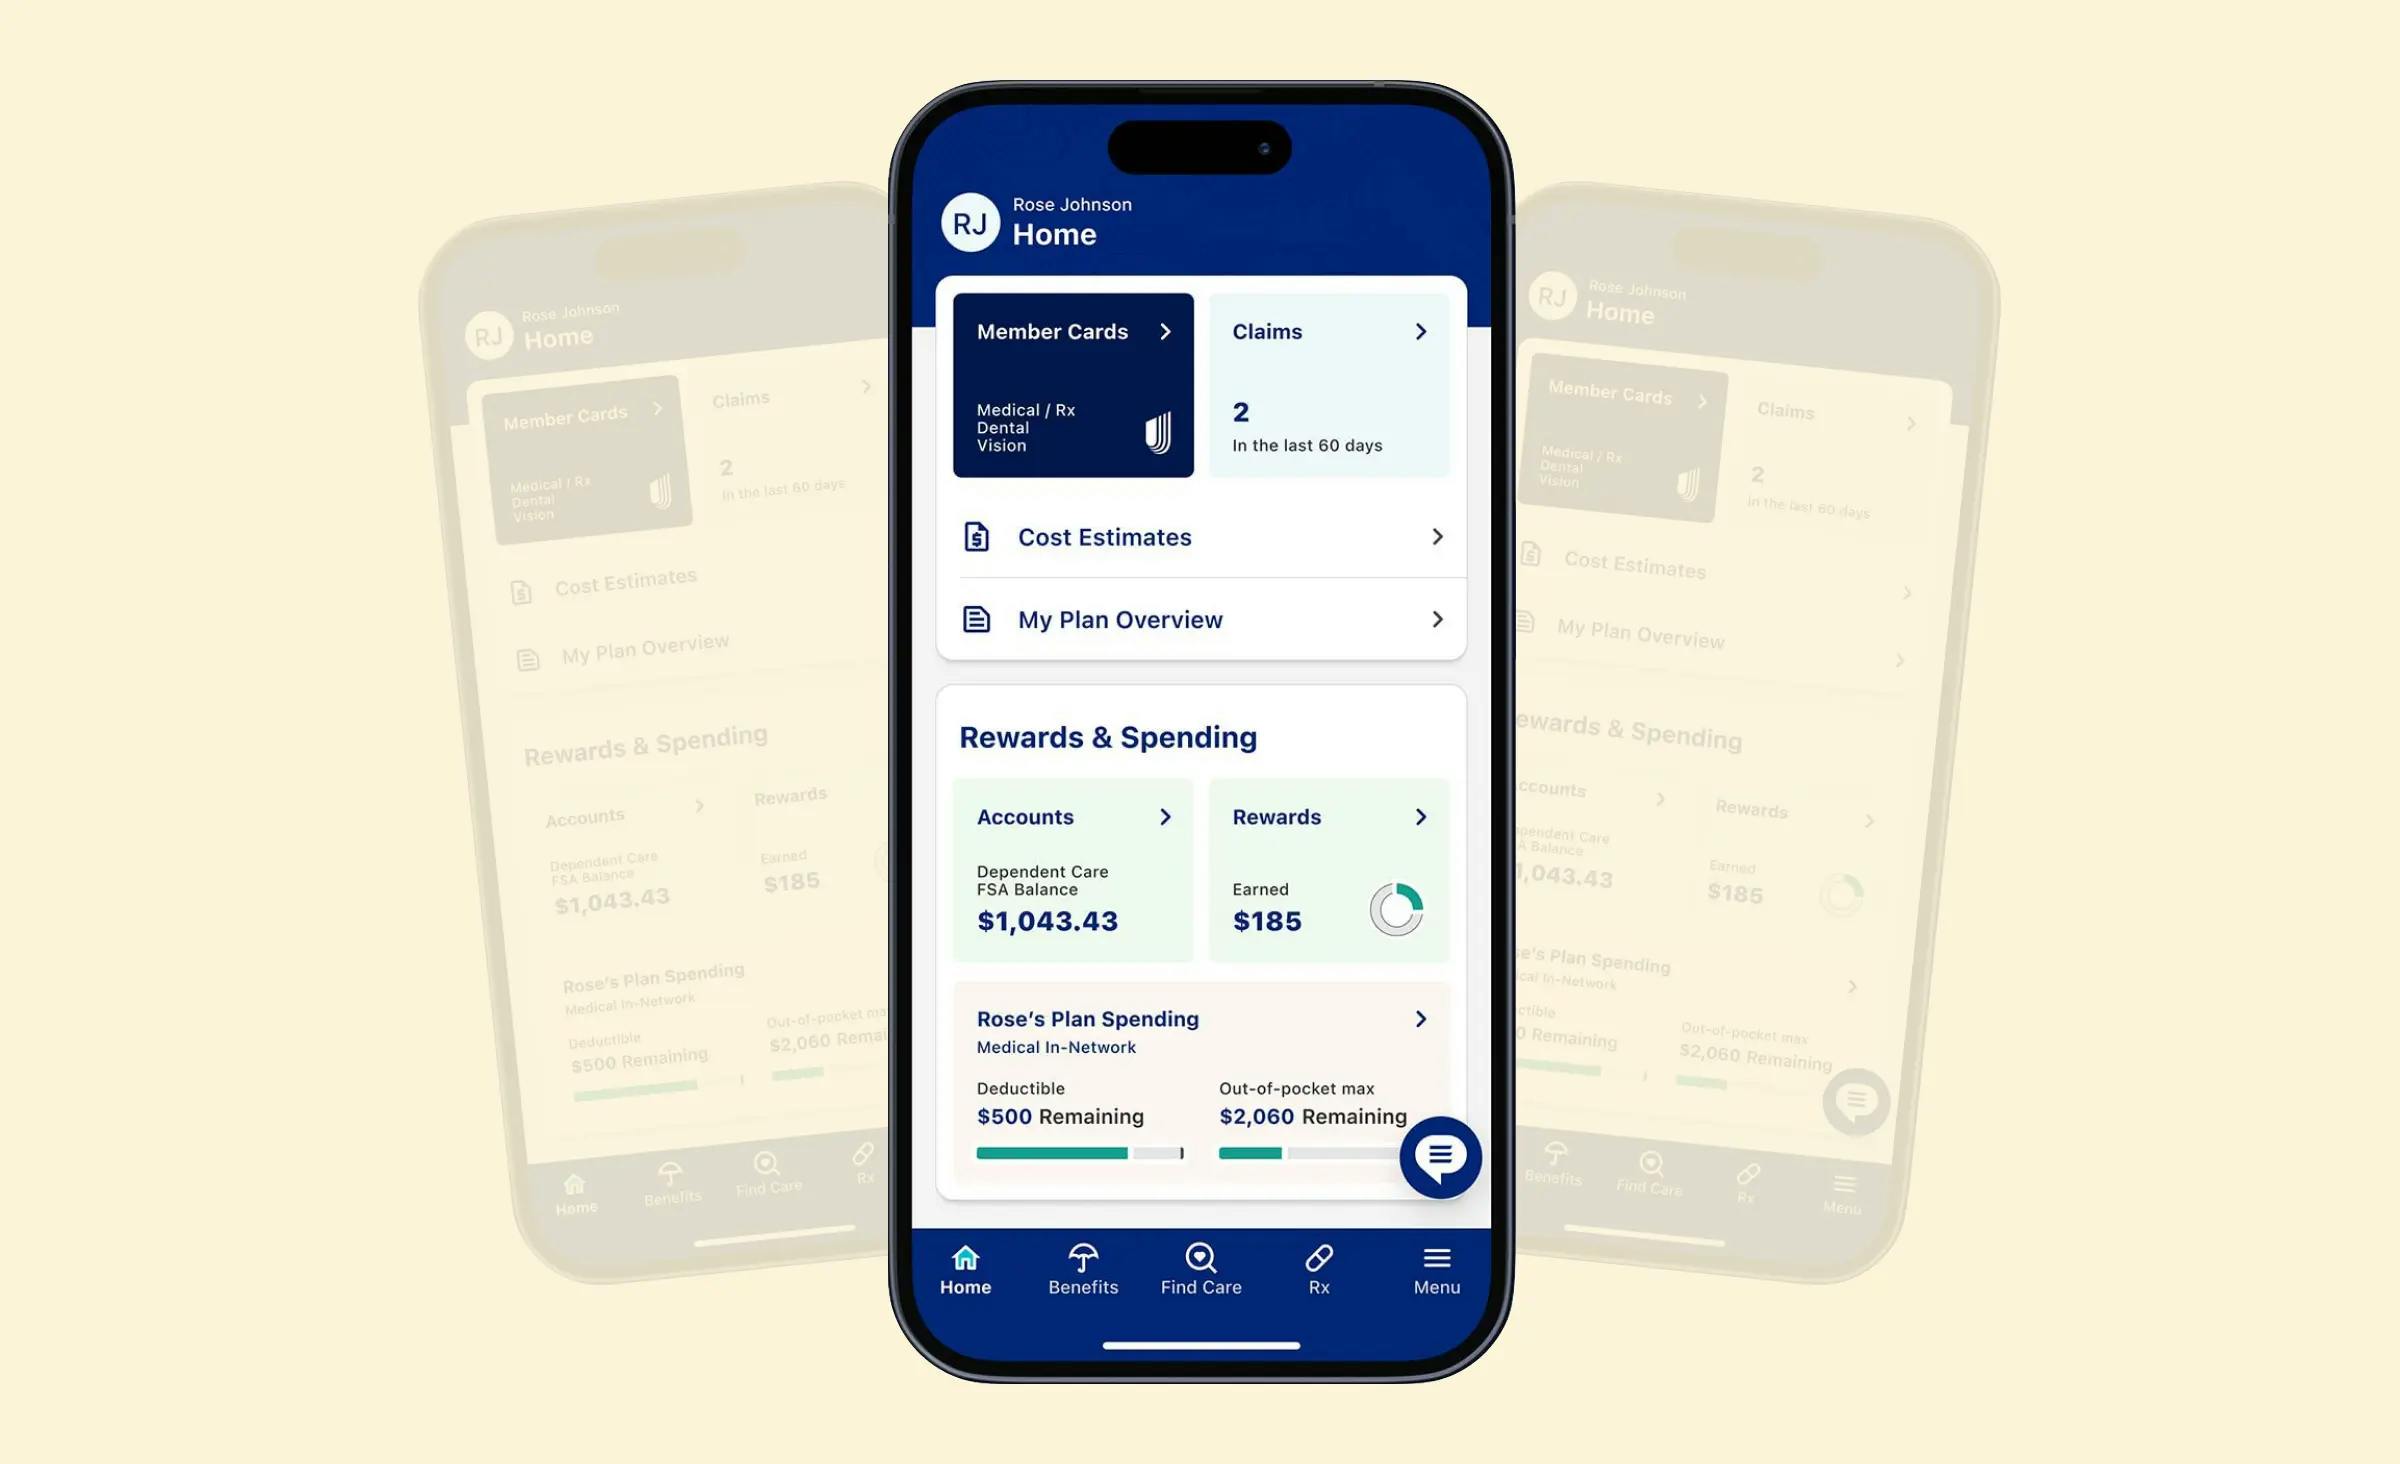 A screenshot of the UnitedHealthcare mobile app. The interface displays member cards, the number of claims, rewards, and spending.